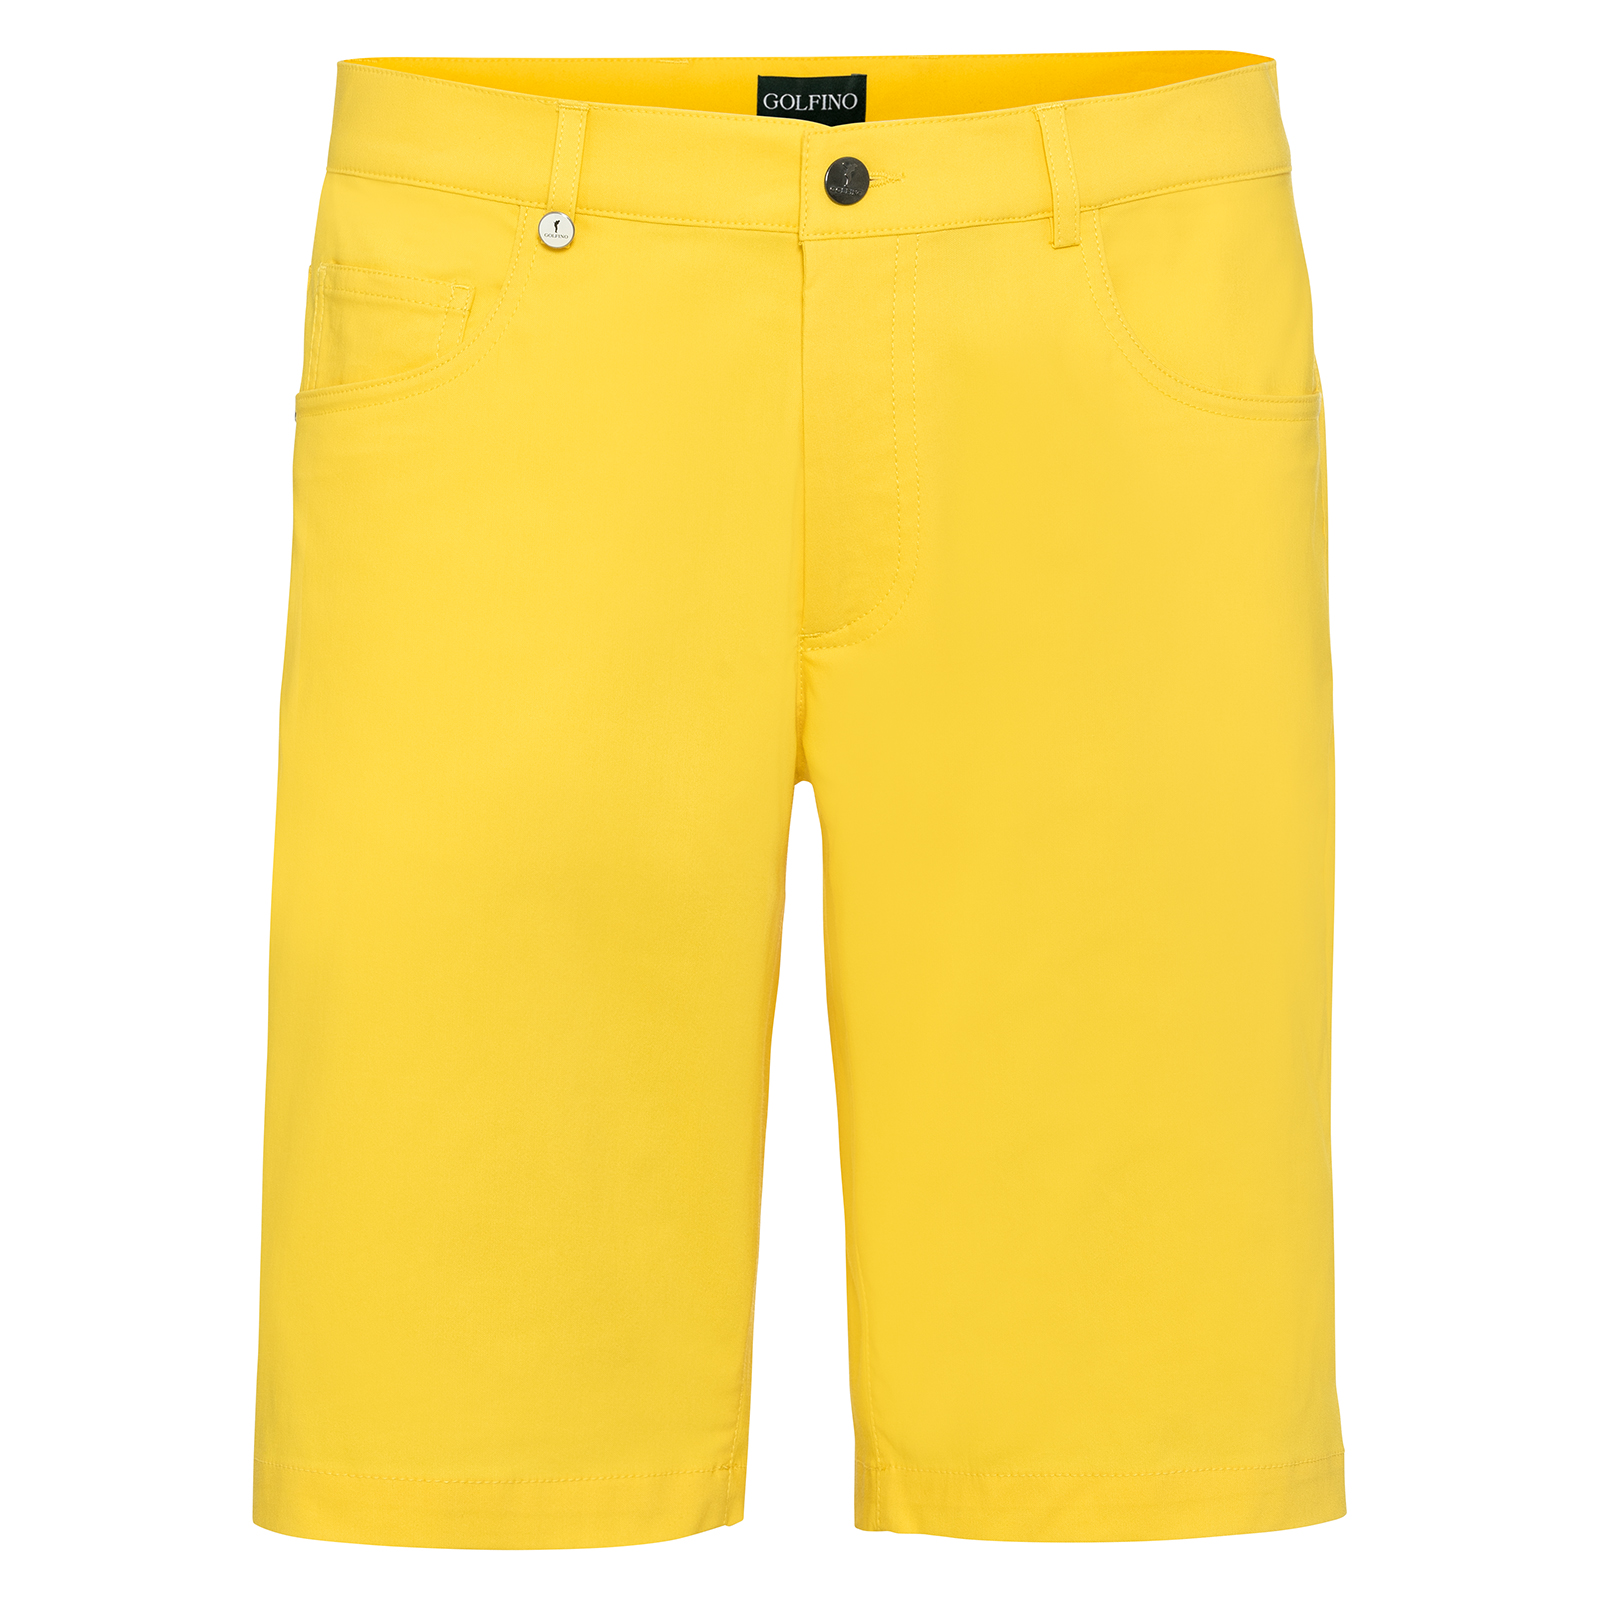 Men's golf shorts made from stretch material with sun protection function